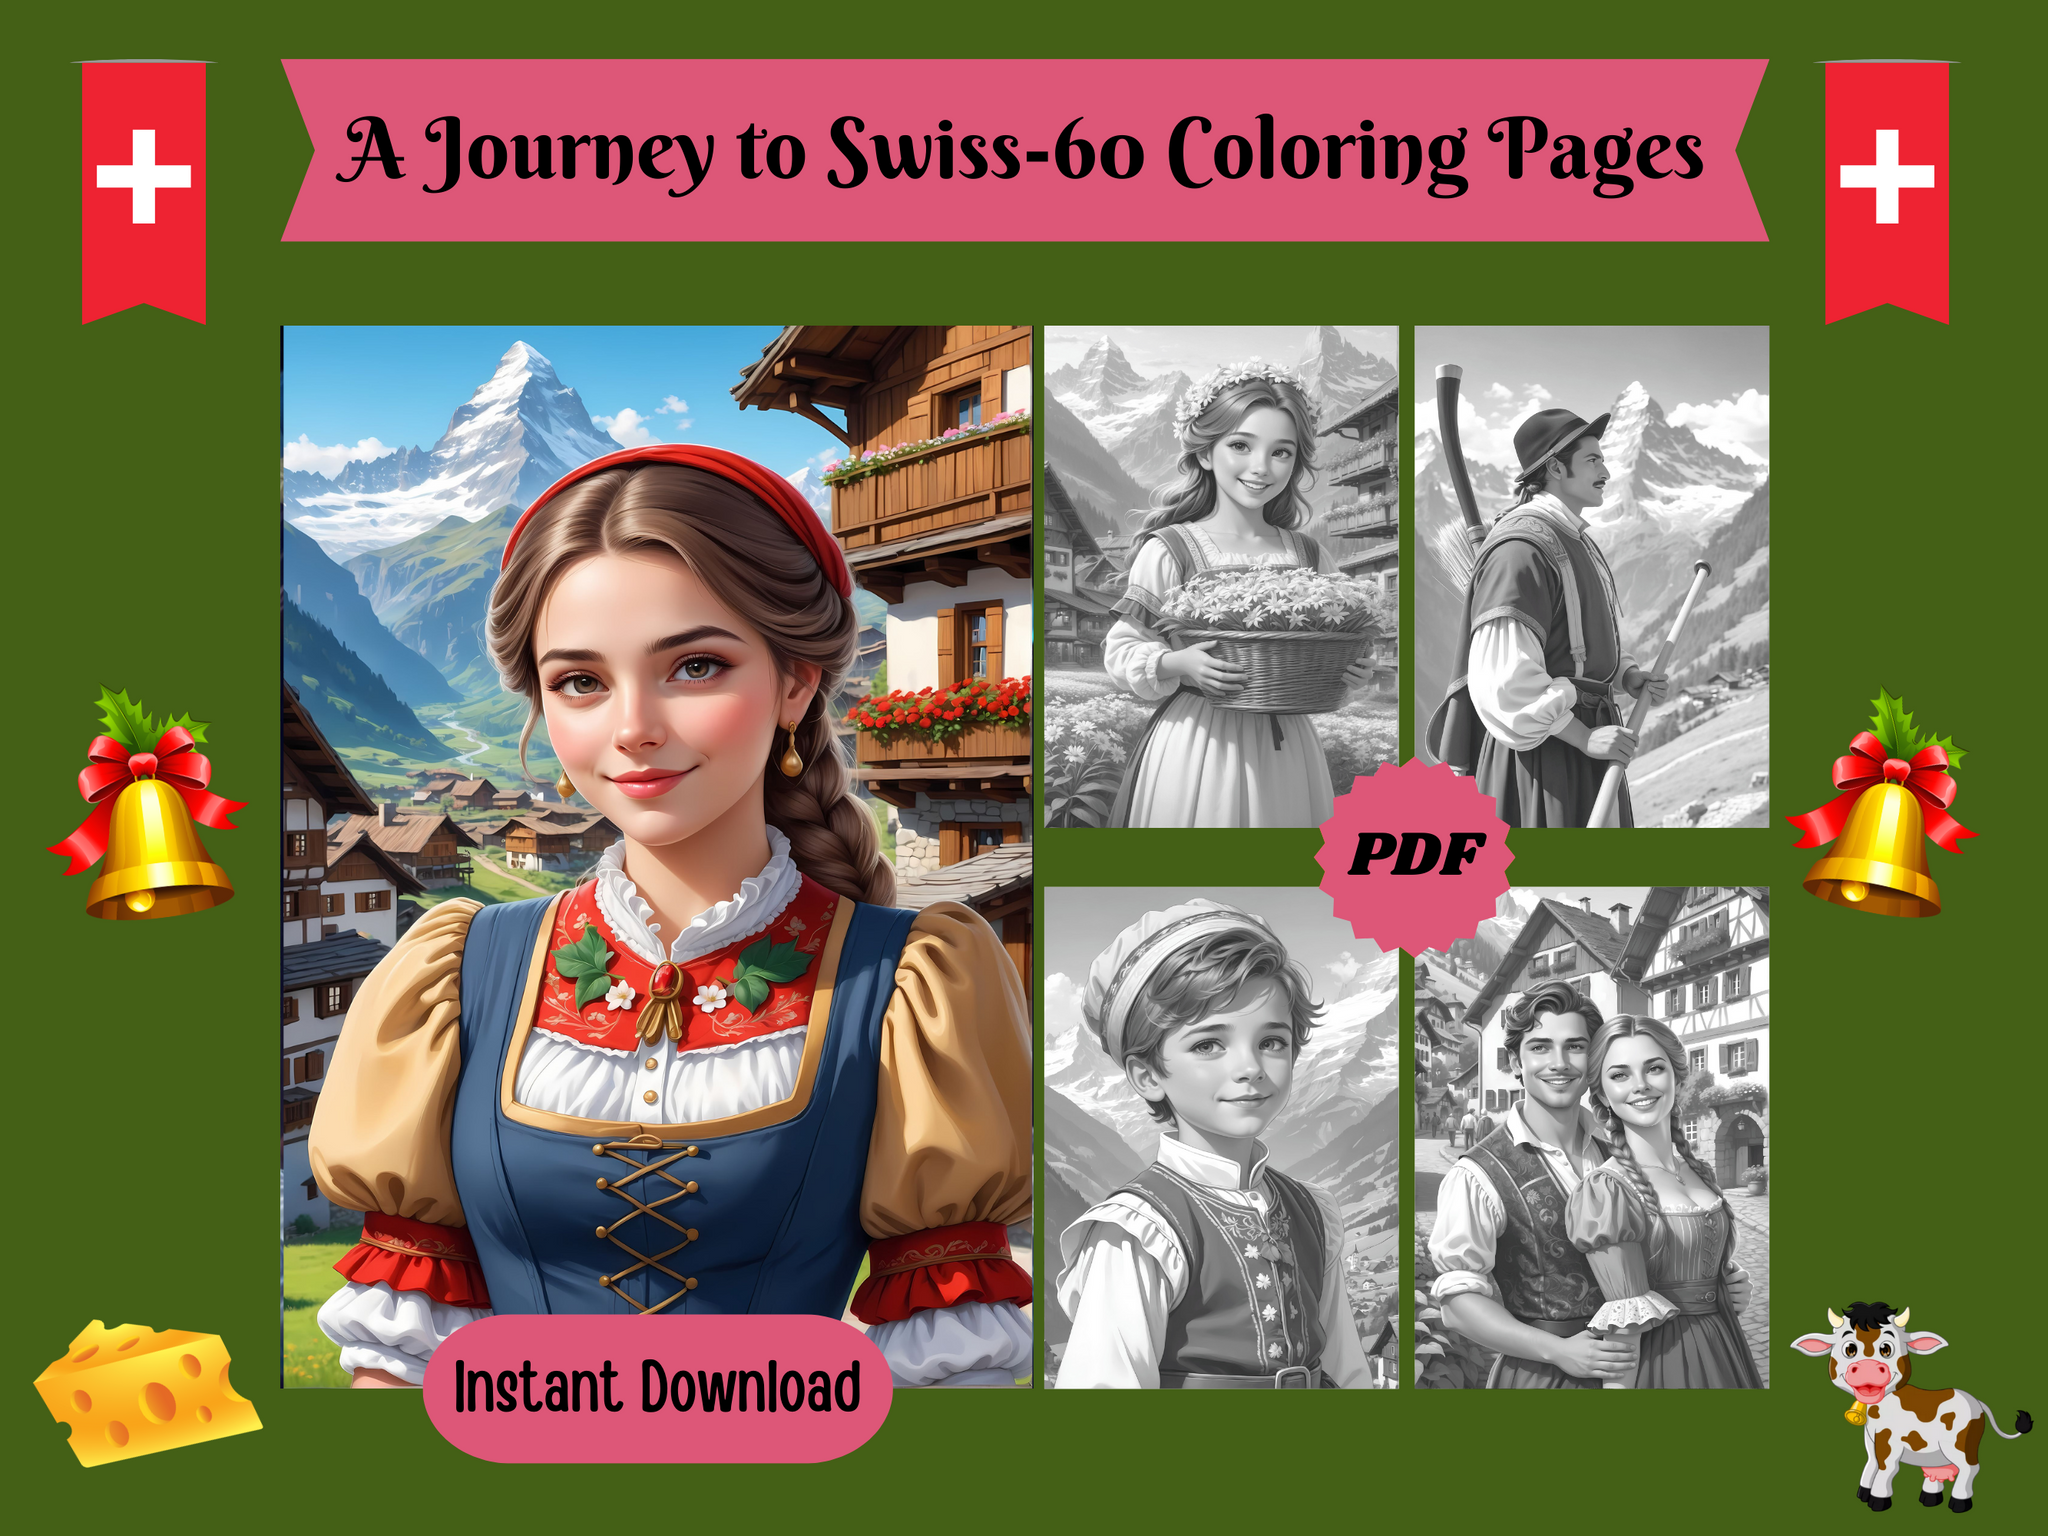 A Journey to Switzerland-60 Printable Grayscale Coloring Pages, Digital download